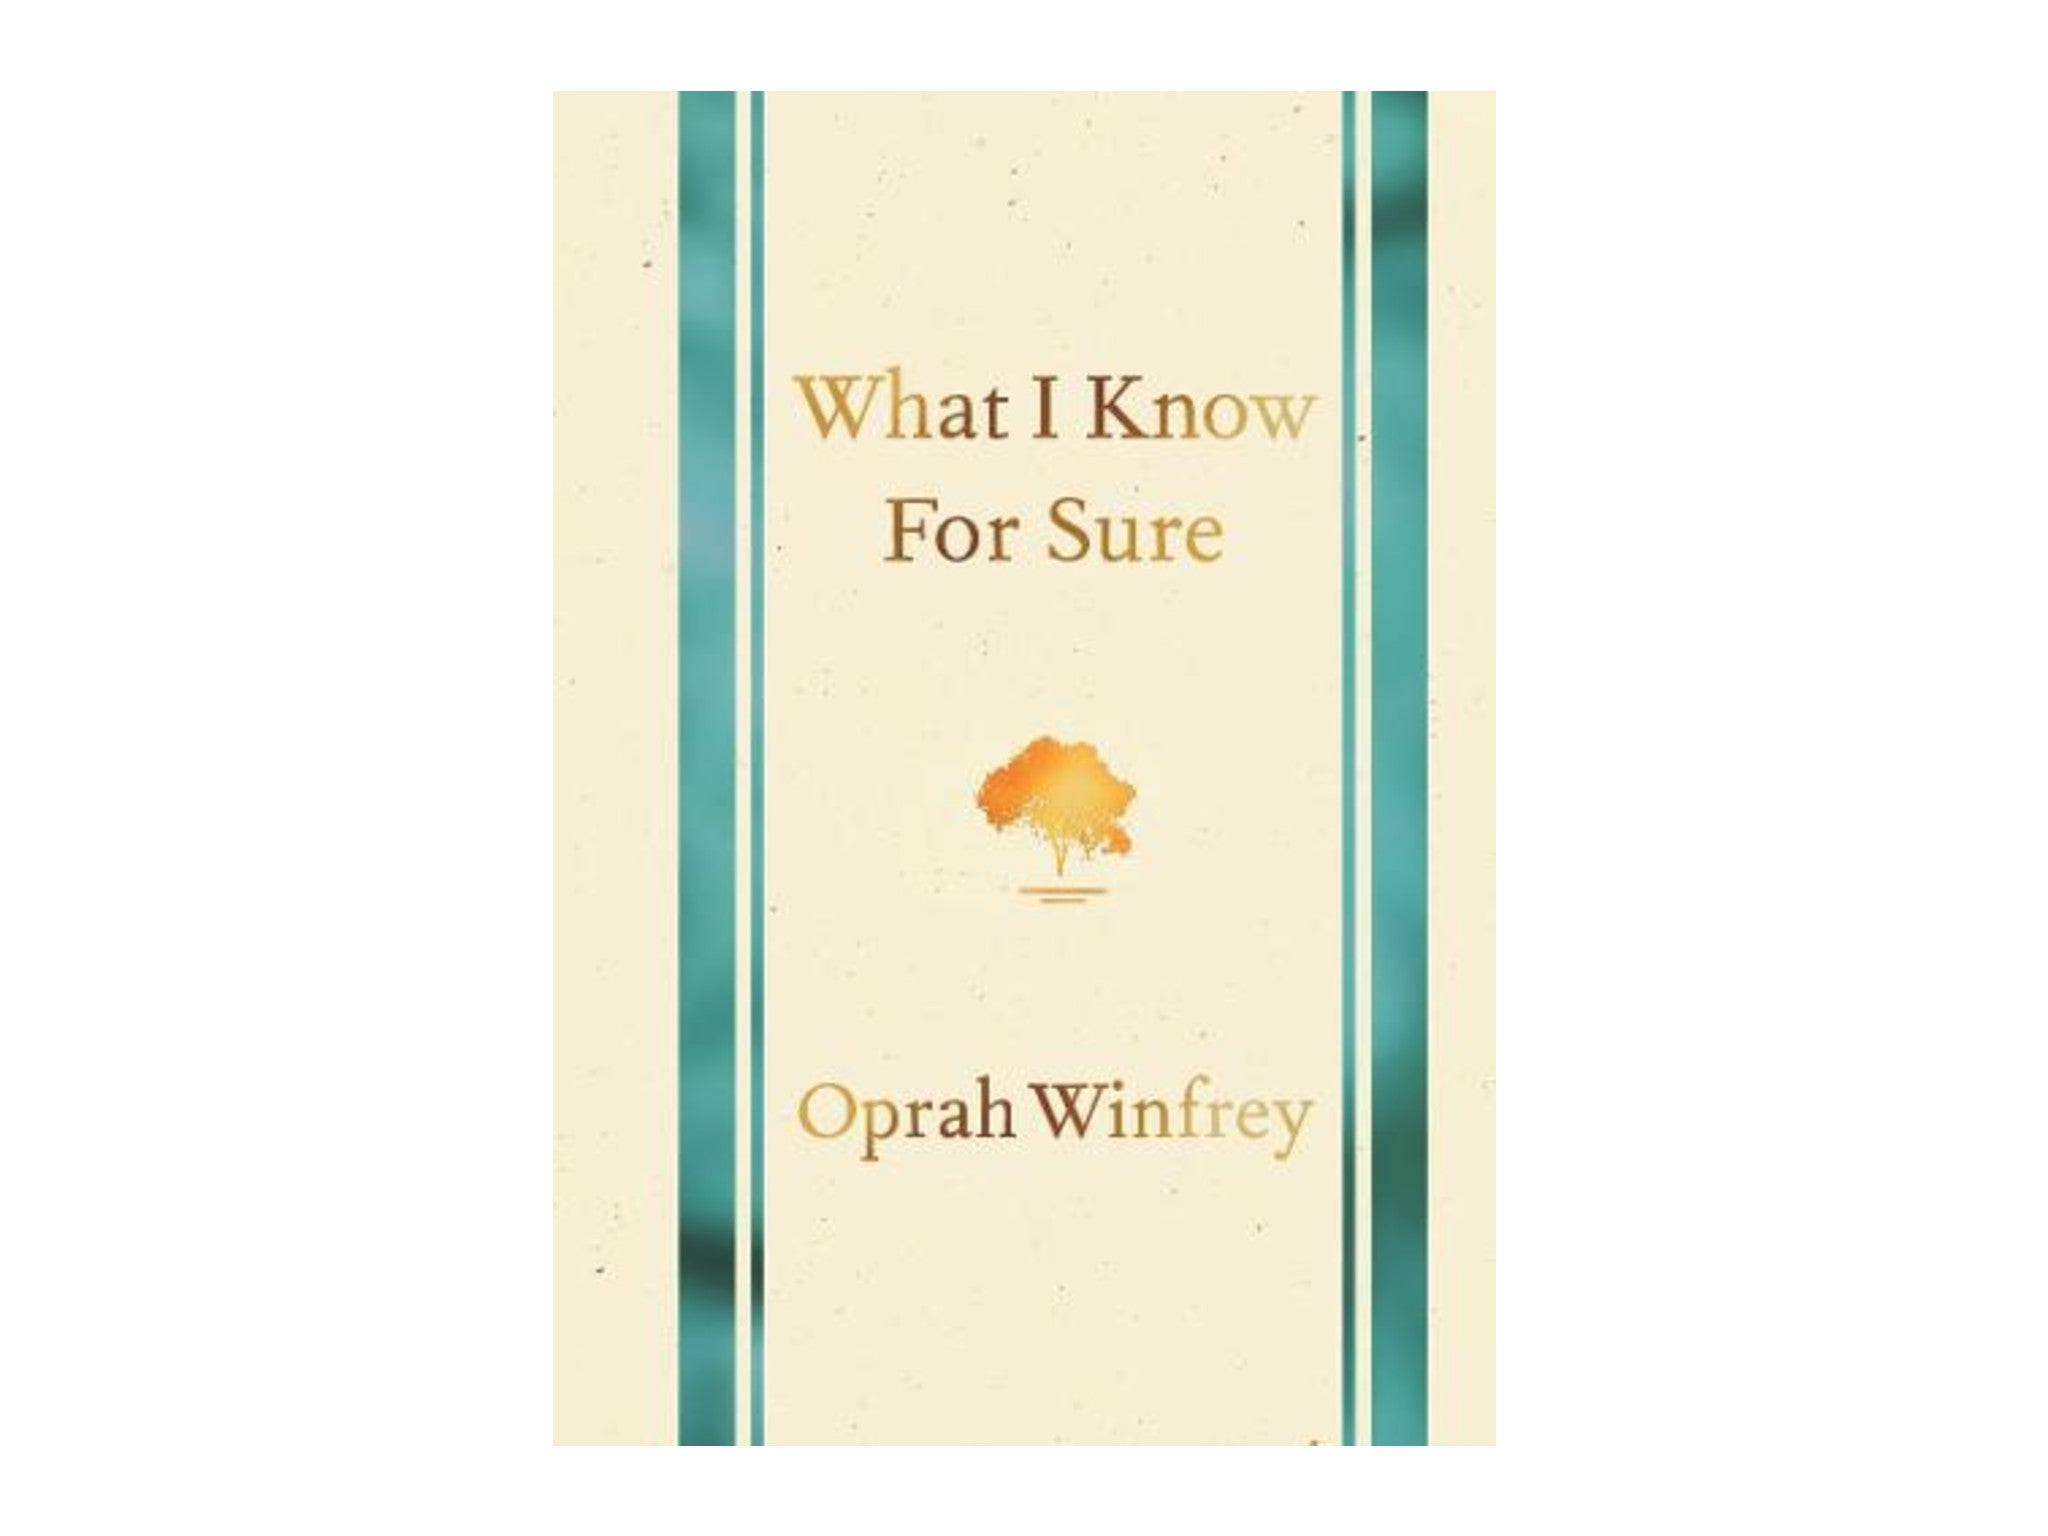 What I Know for Sure' by Oprah Winfrey   indybest.jpeg